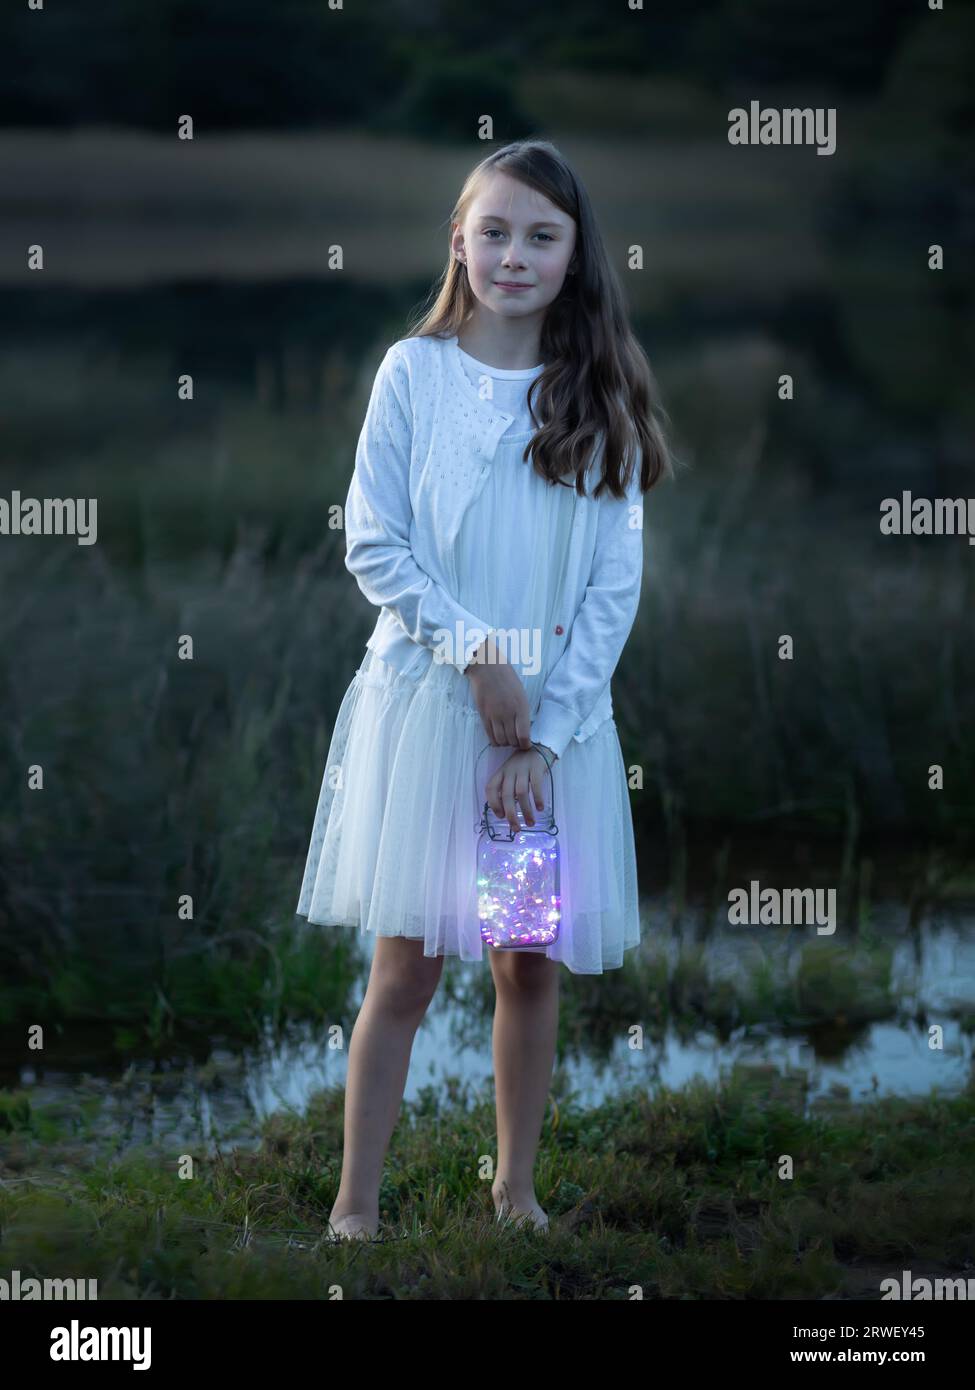 Full length portrait of a young girl dressed in a white dress at dusk holding a lantern Stock Photo